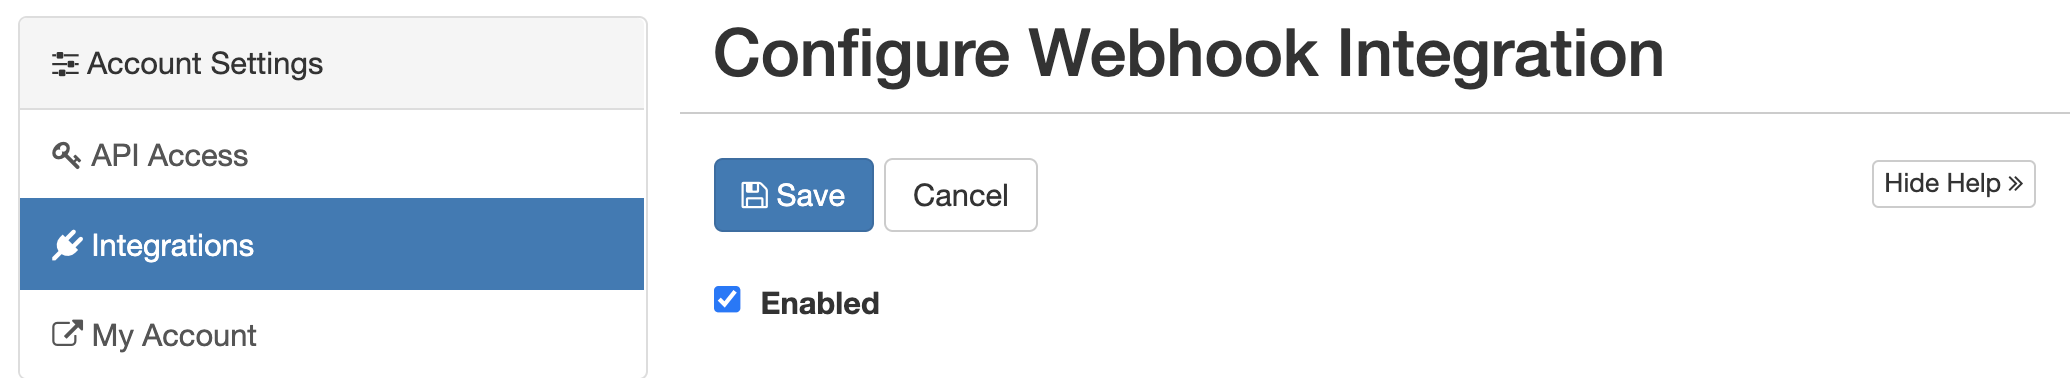 Another screenshot of the integration page in Wowza Streaming Cloud for enabling Webhooks.